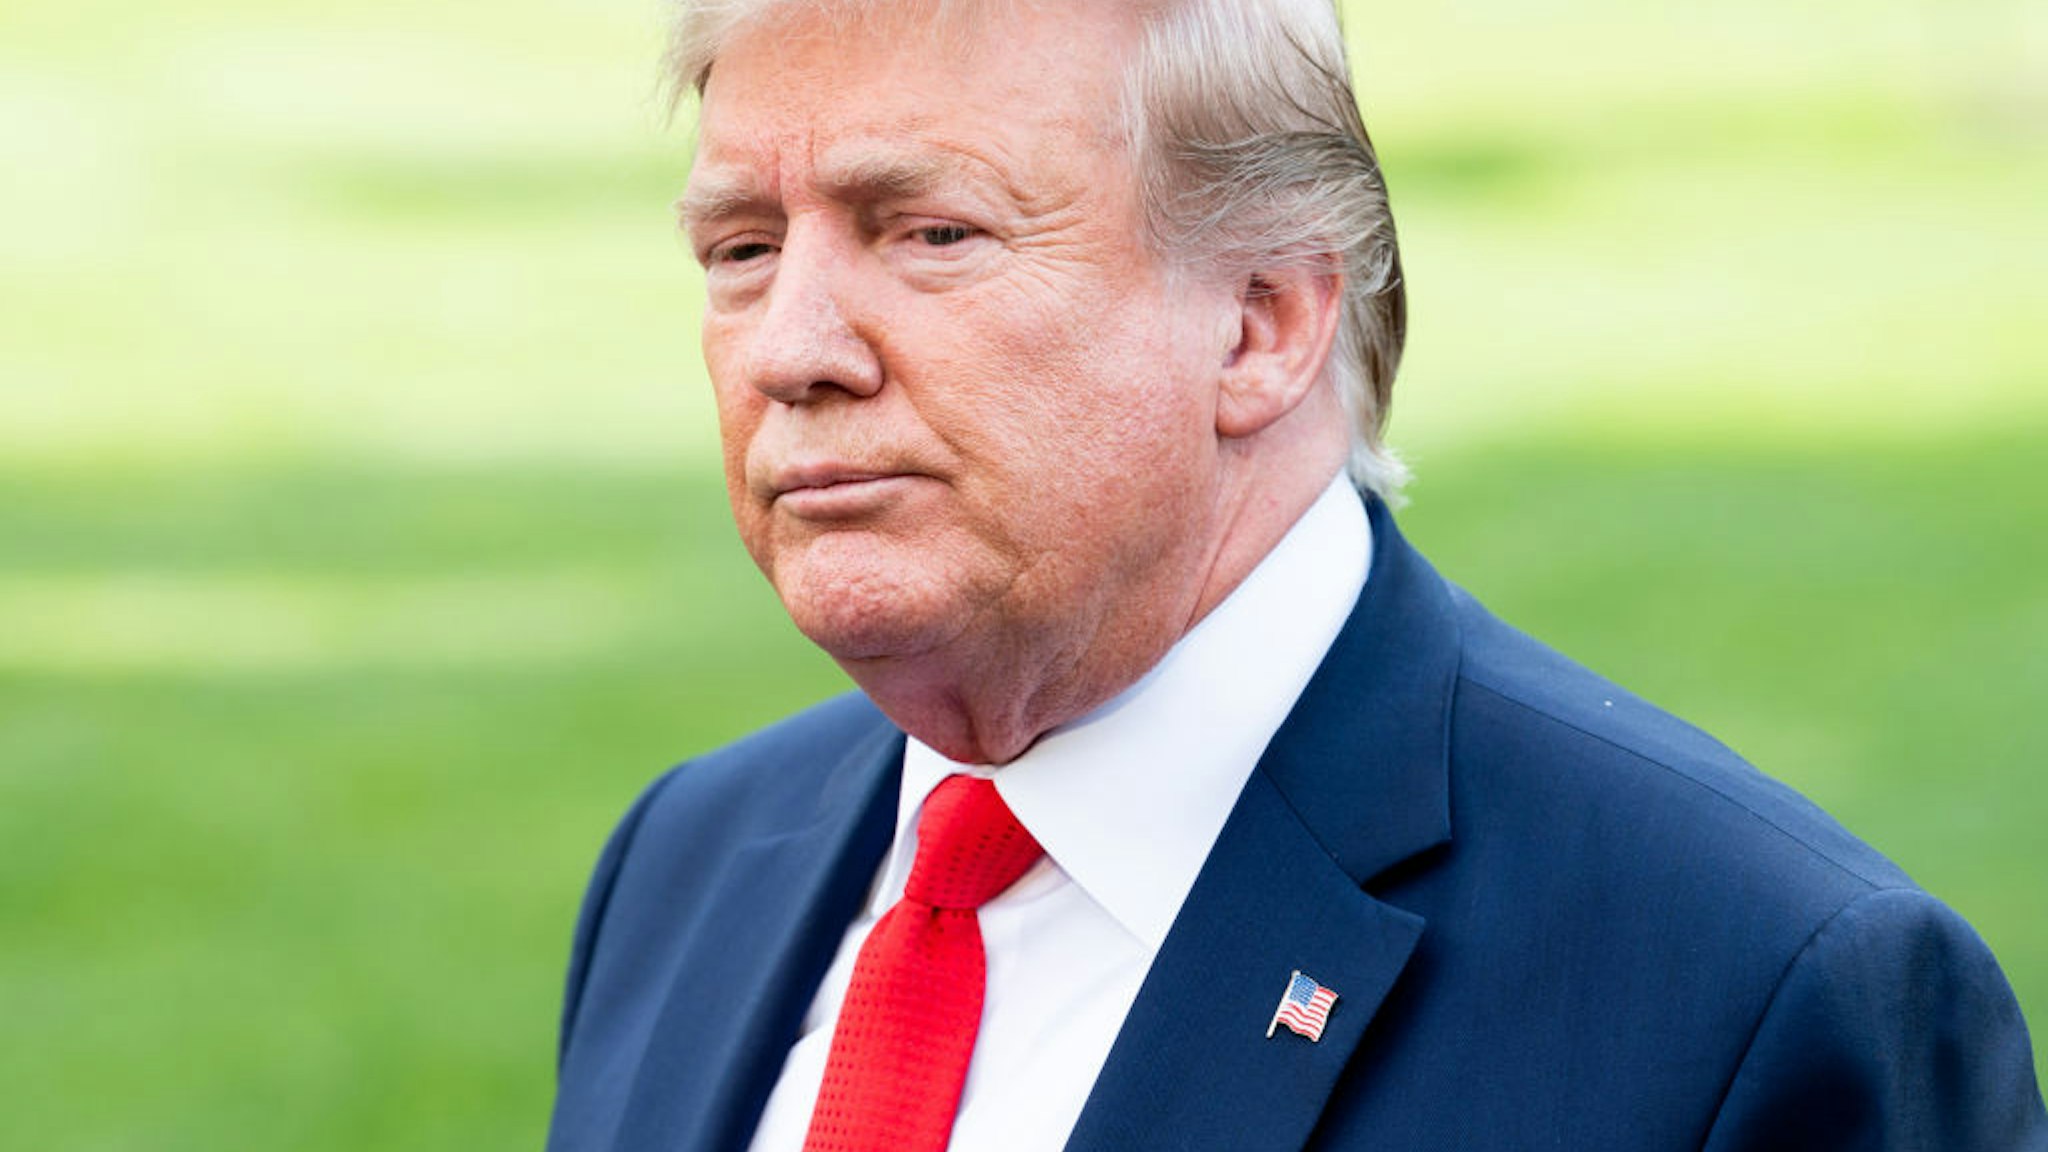 WASHINGTON, DC, UNITED STATES - 2019/07/24: President Donald Trump talking with the press as he leaves the White House in Washington, DC. (Photo by Michael Brochstein/SOPA Images/LightRocket via Getty Images)